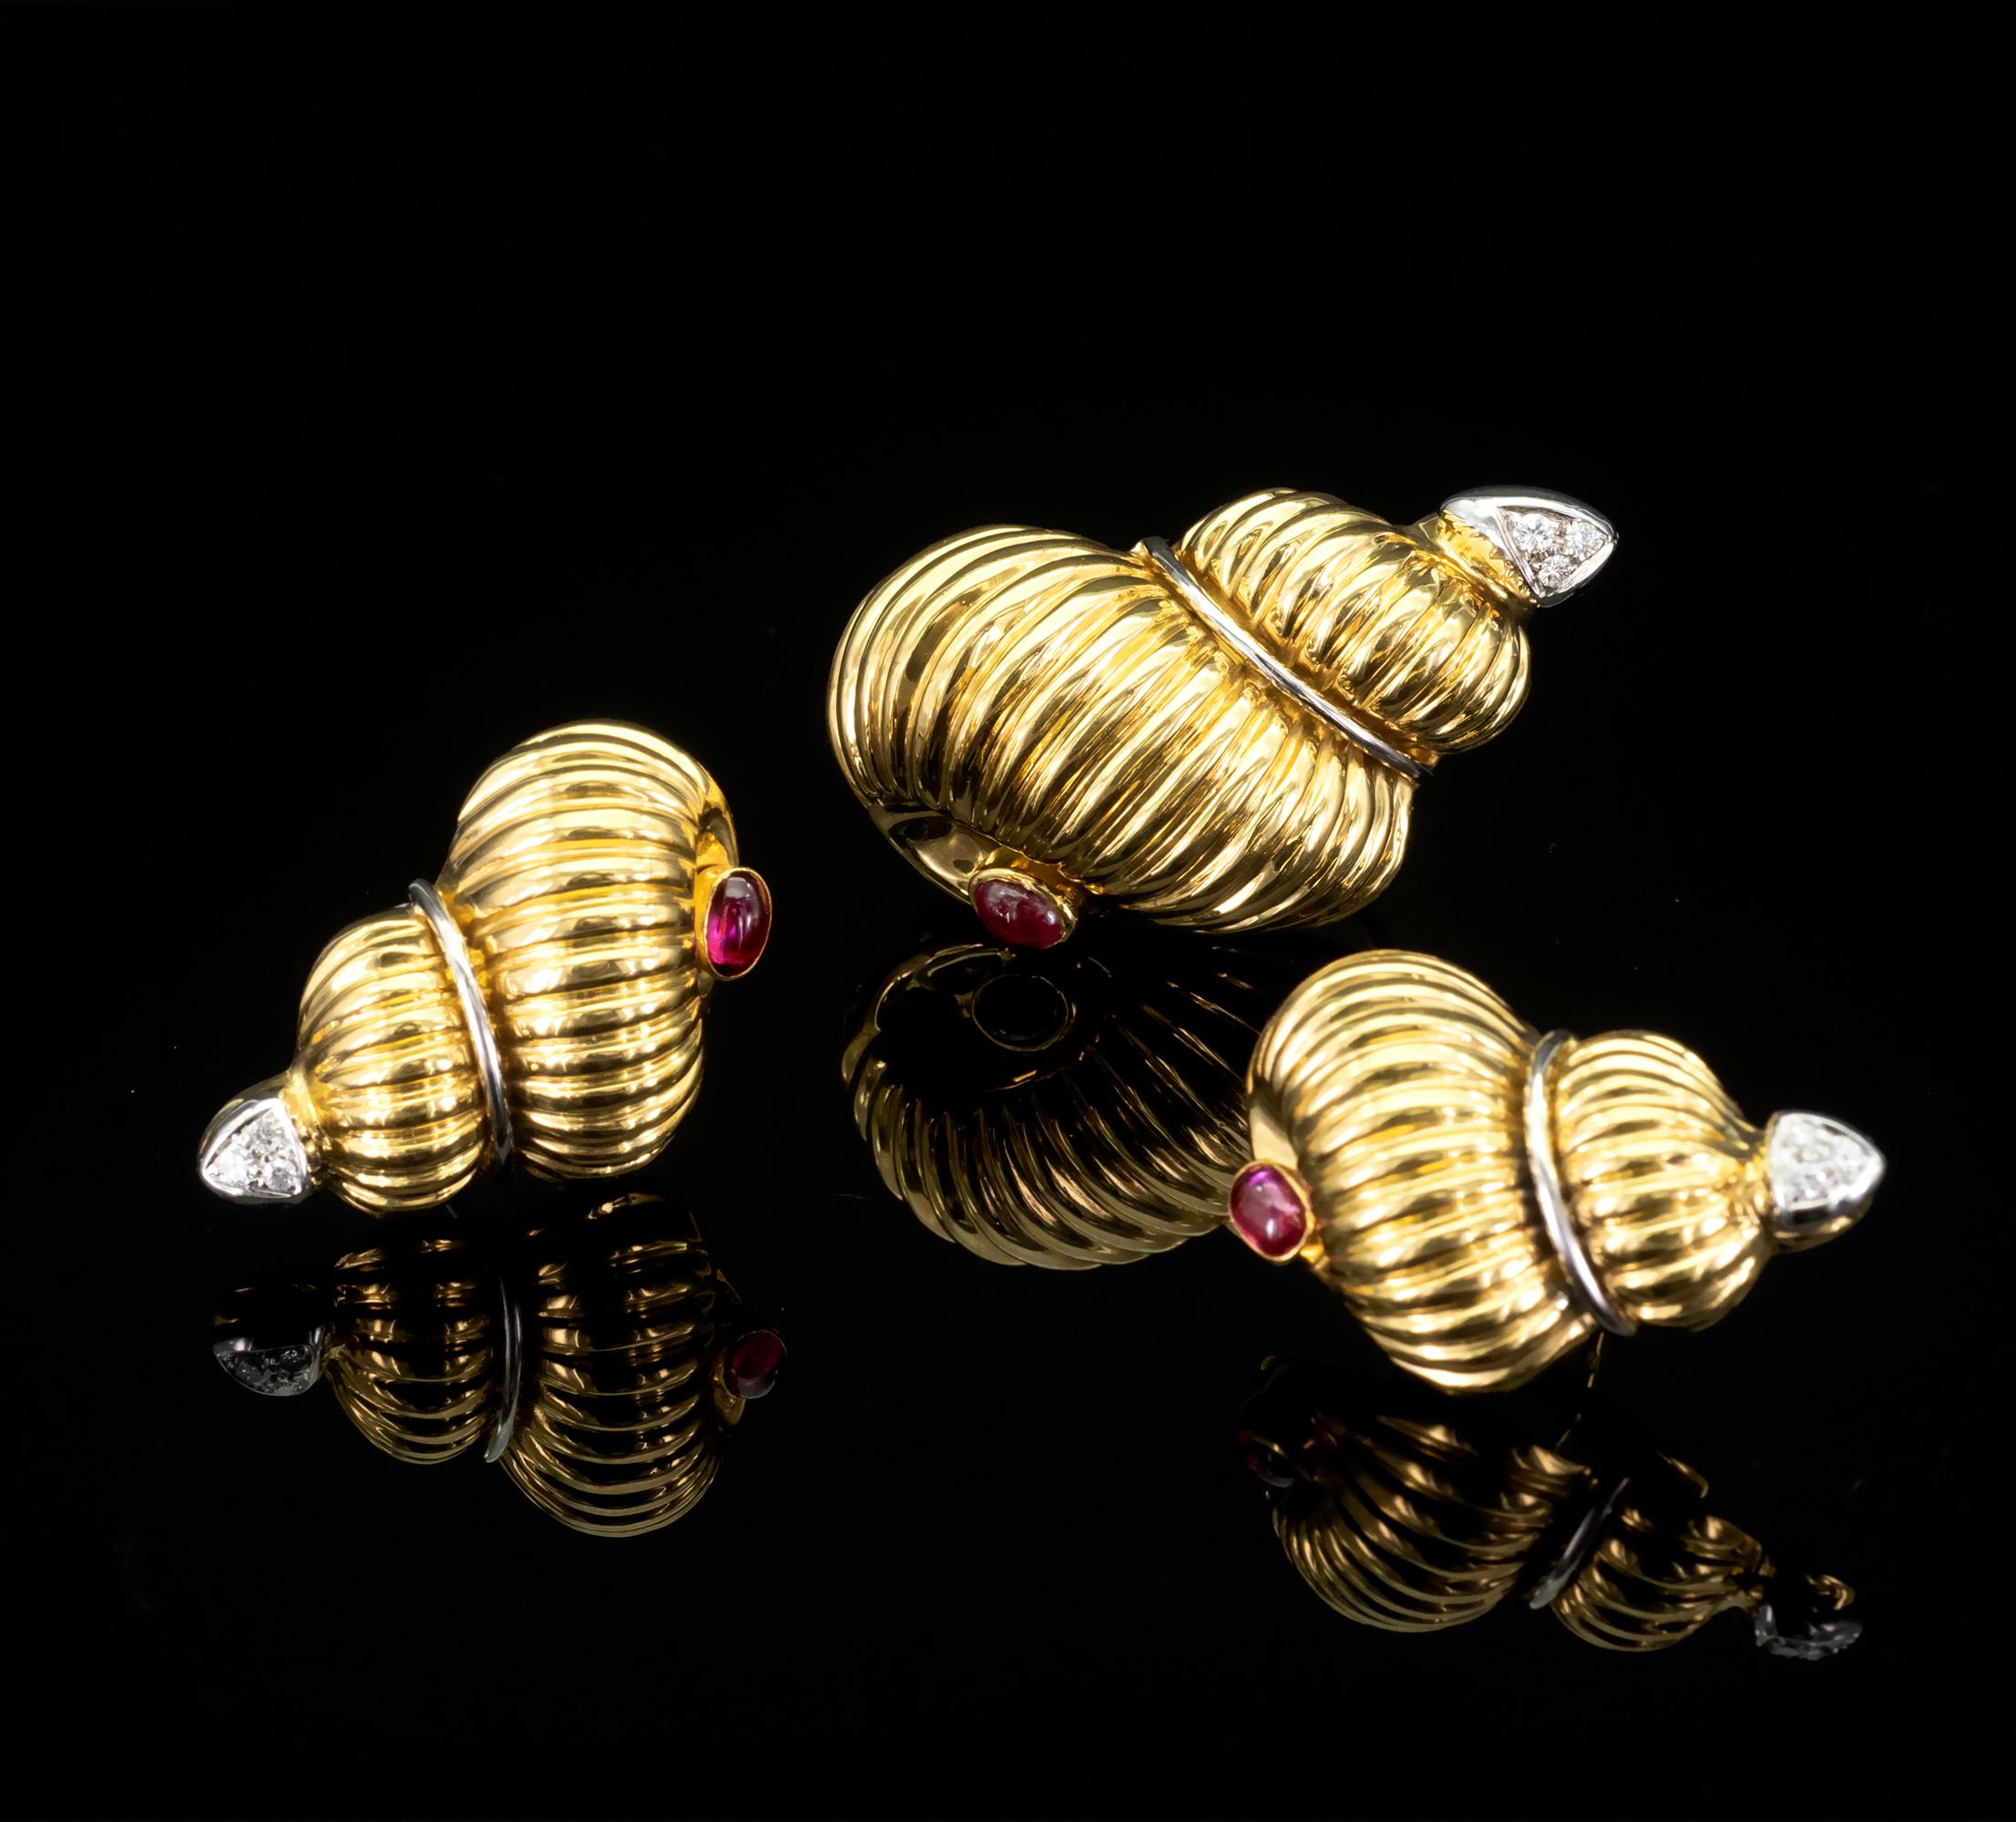 Elegant  shell shaped earring and brooch set . Made in 18 karat ribbed yellow gold . Each shell is set with lively ruby cabochon on one side while the top of it is adorned with diamonds set on white gold. 
Details:
Rubies: 1.51 carat
Diamonds: 0.26